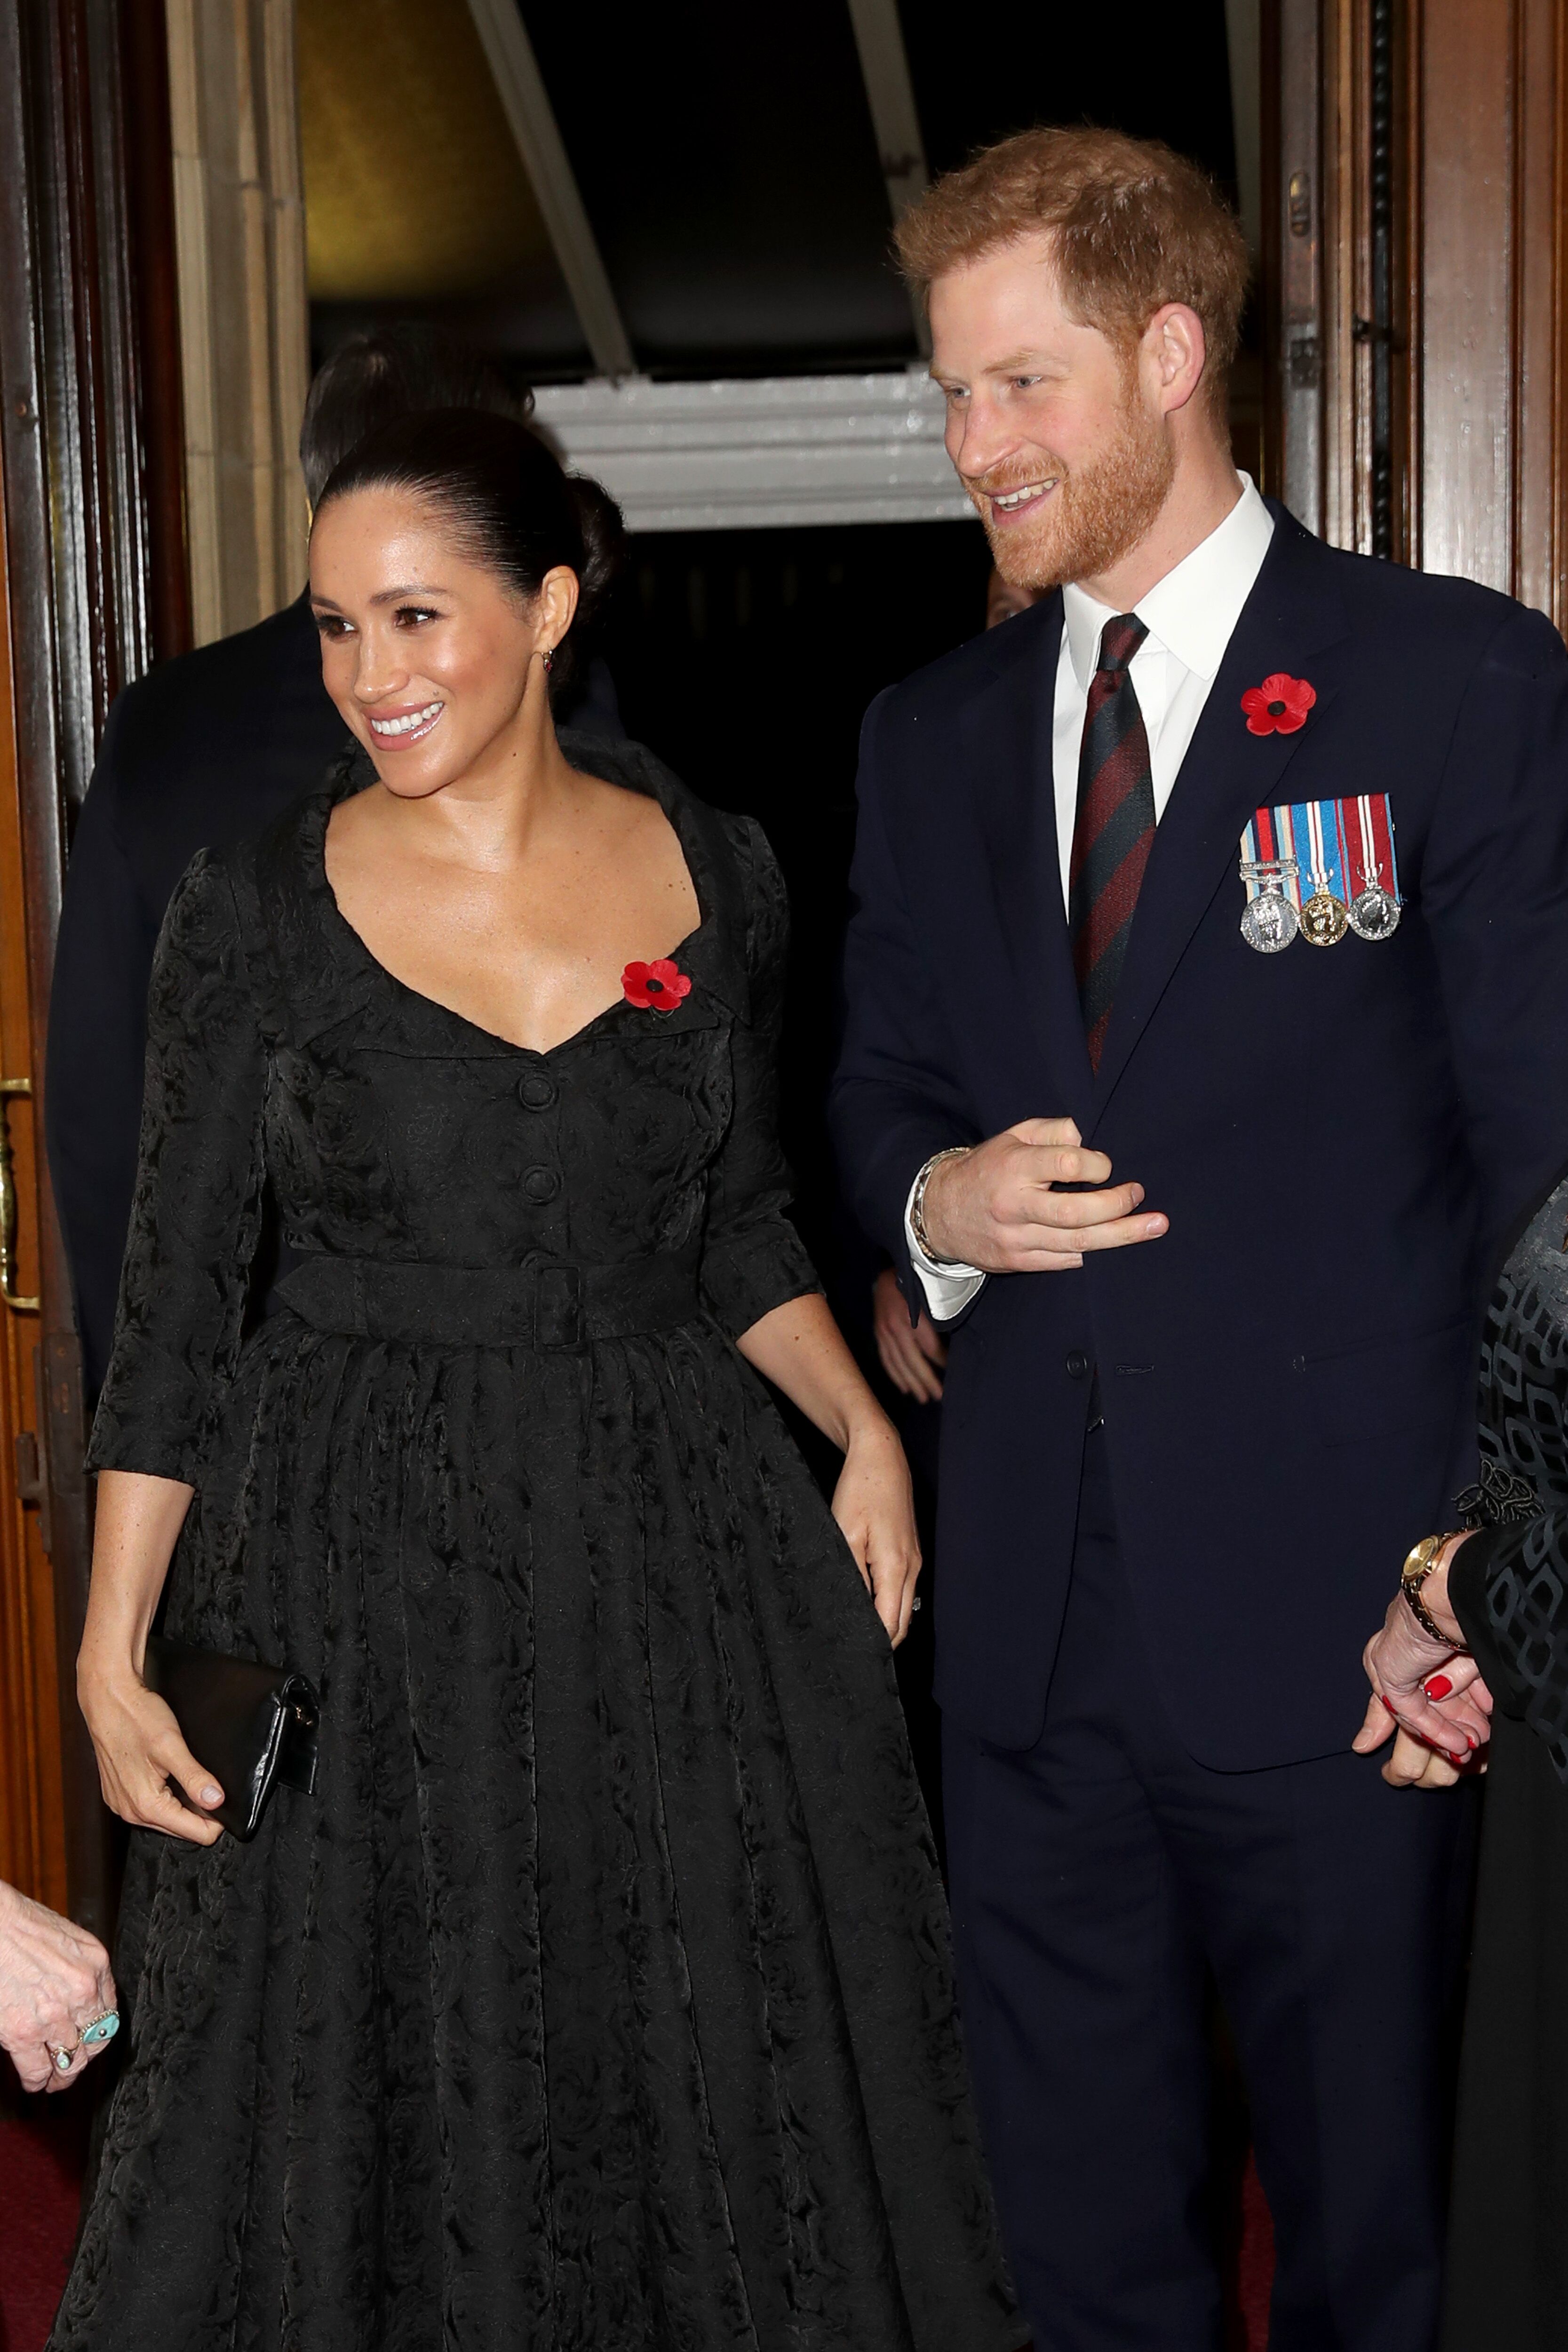 Duchess Meghan and Prince Harry at the annual Royal British Legion Festival of Remembrance on November 09, 2019, in London, England | Photo: Chris Jackson/Getty Images